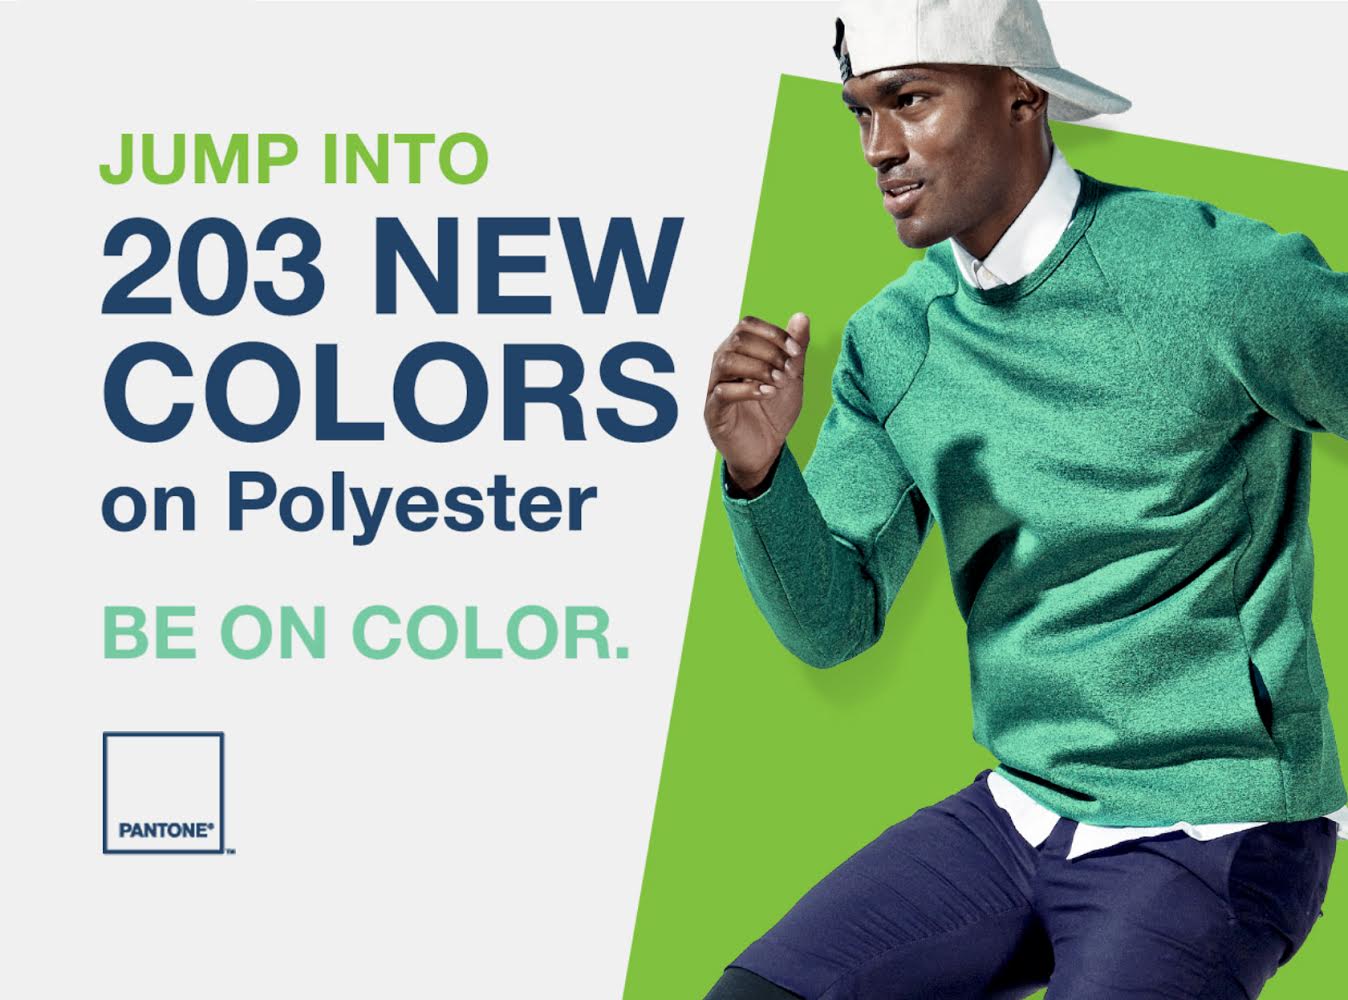 Pantone Releases 203 New Colors for Graphic Design - KEYLAY Design